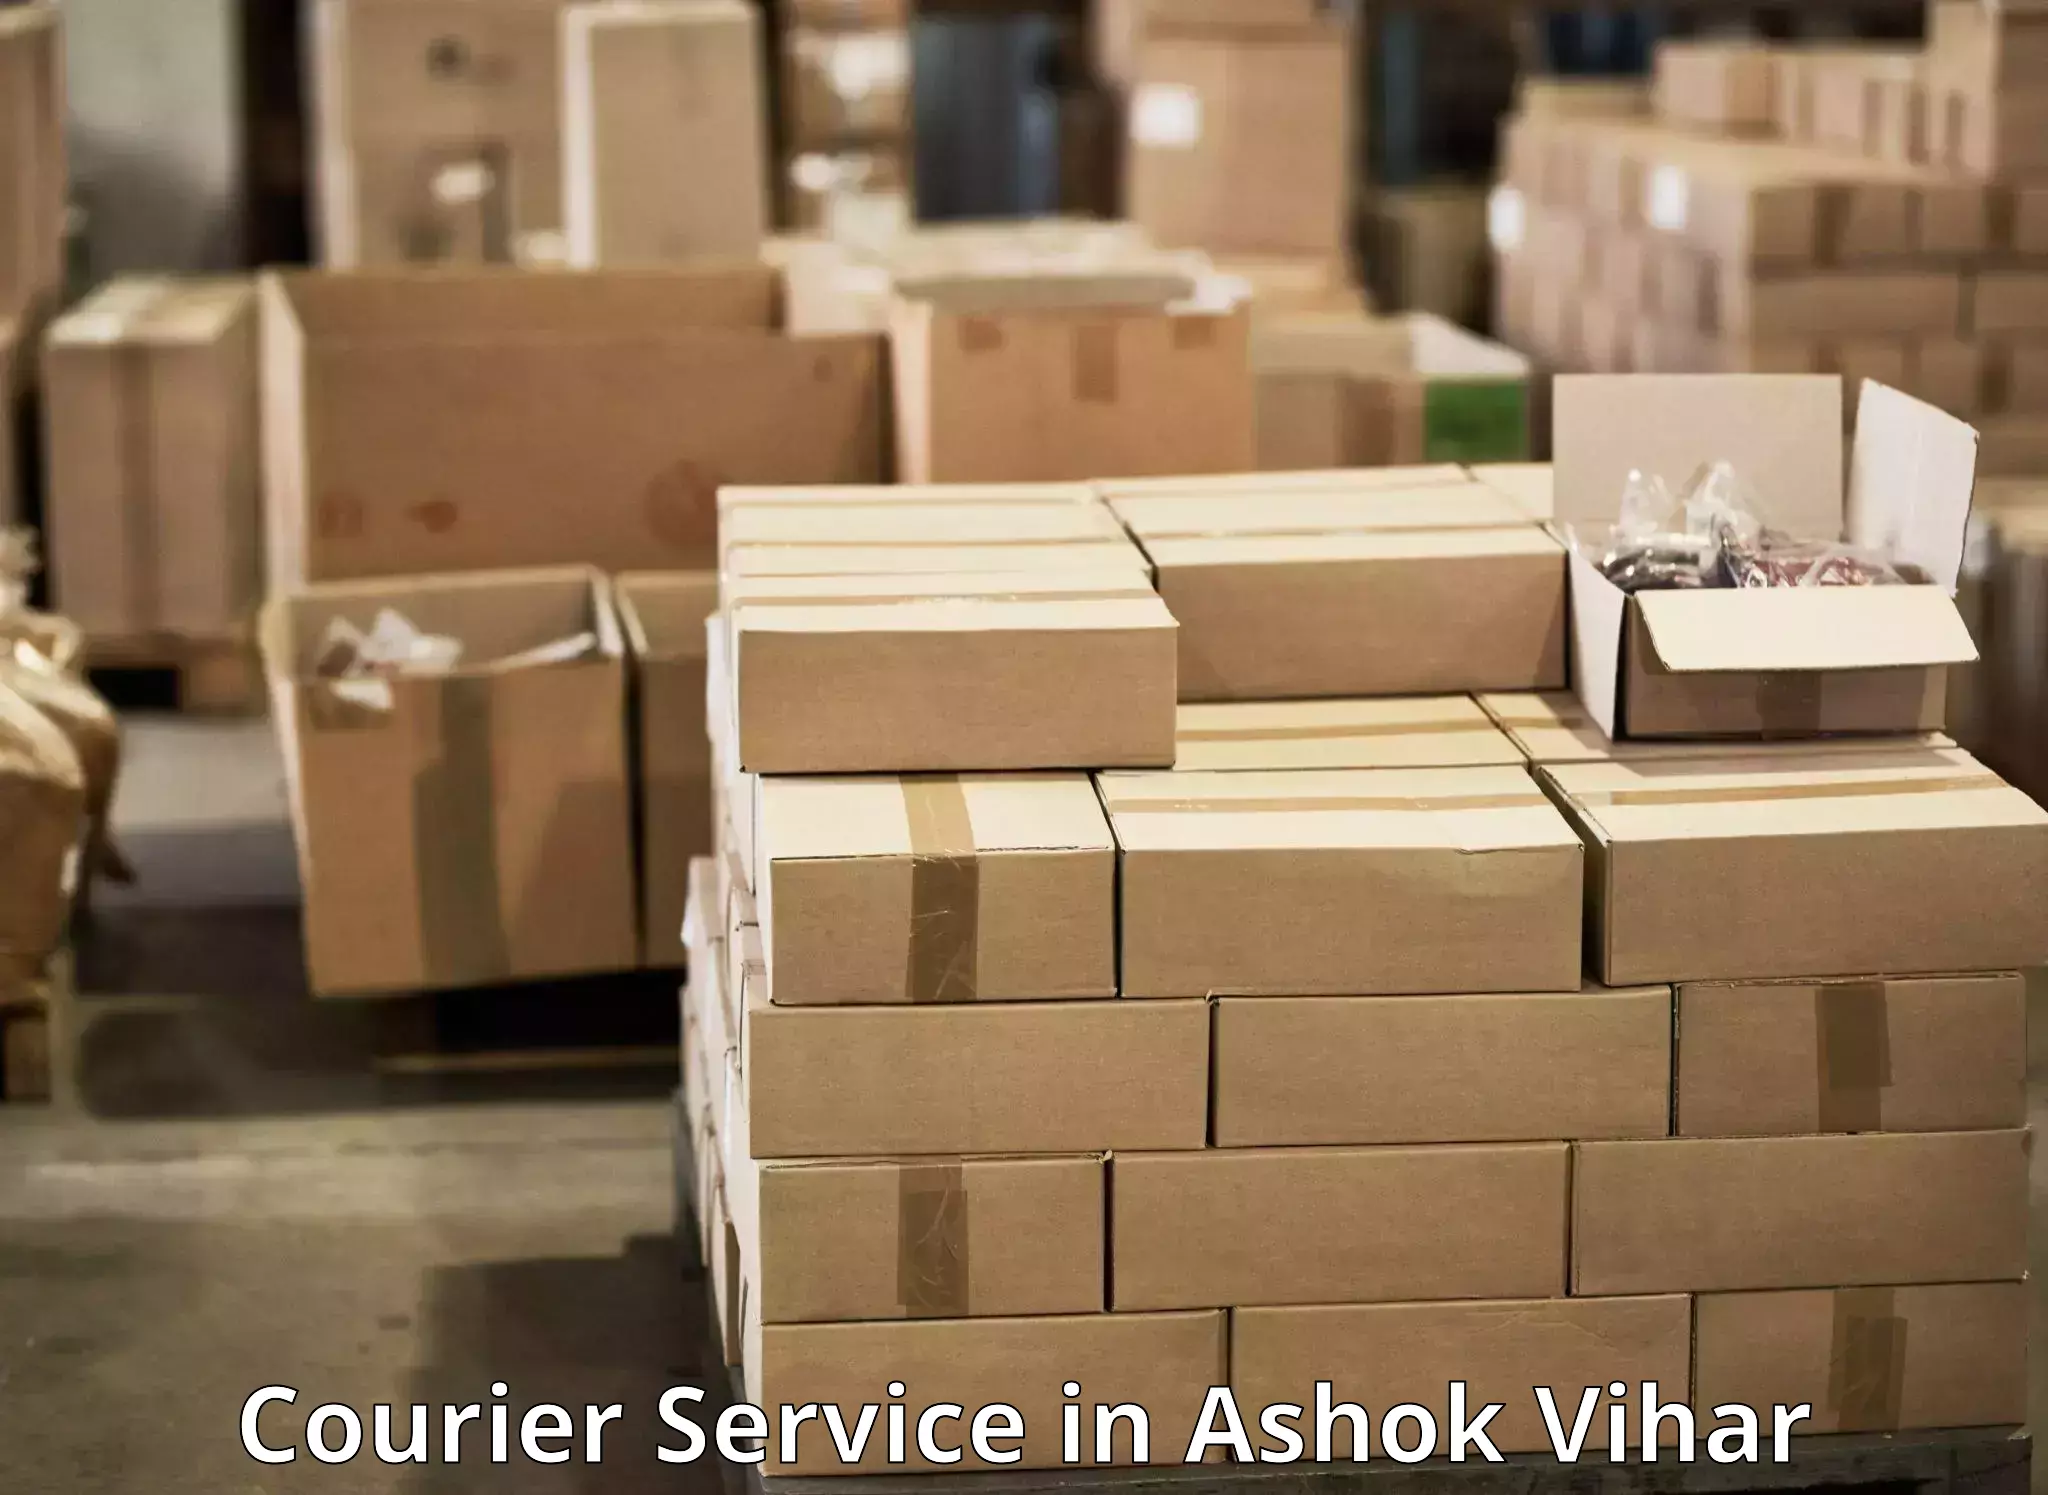 Integrated courier services in Ashok Vihar